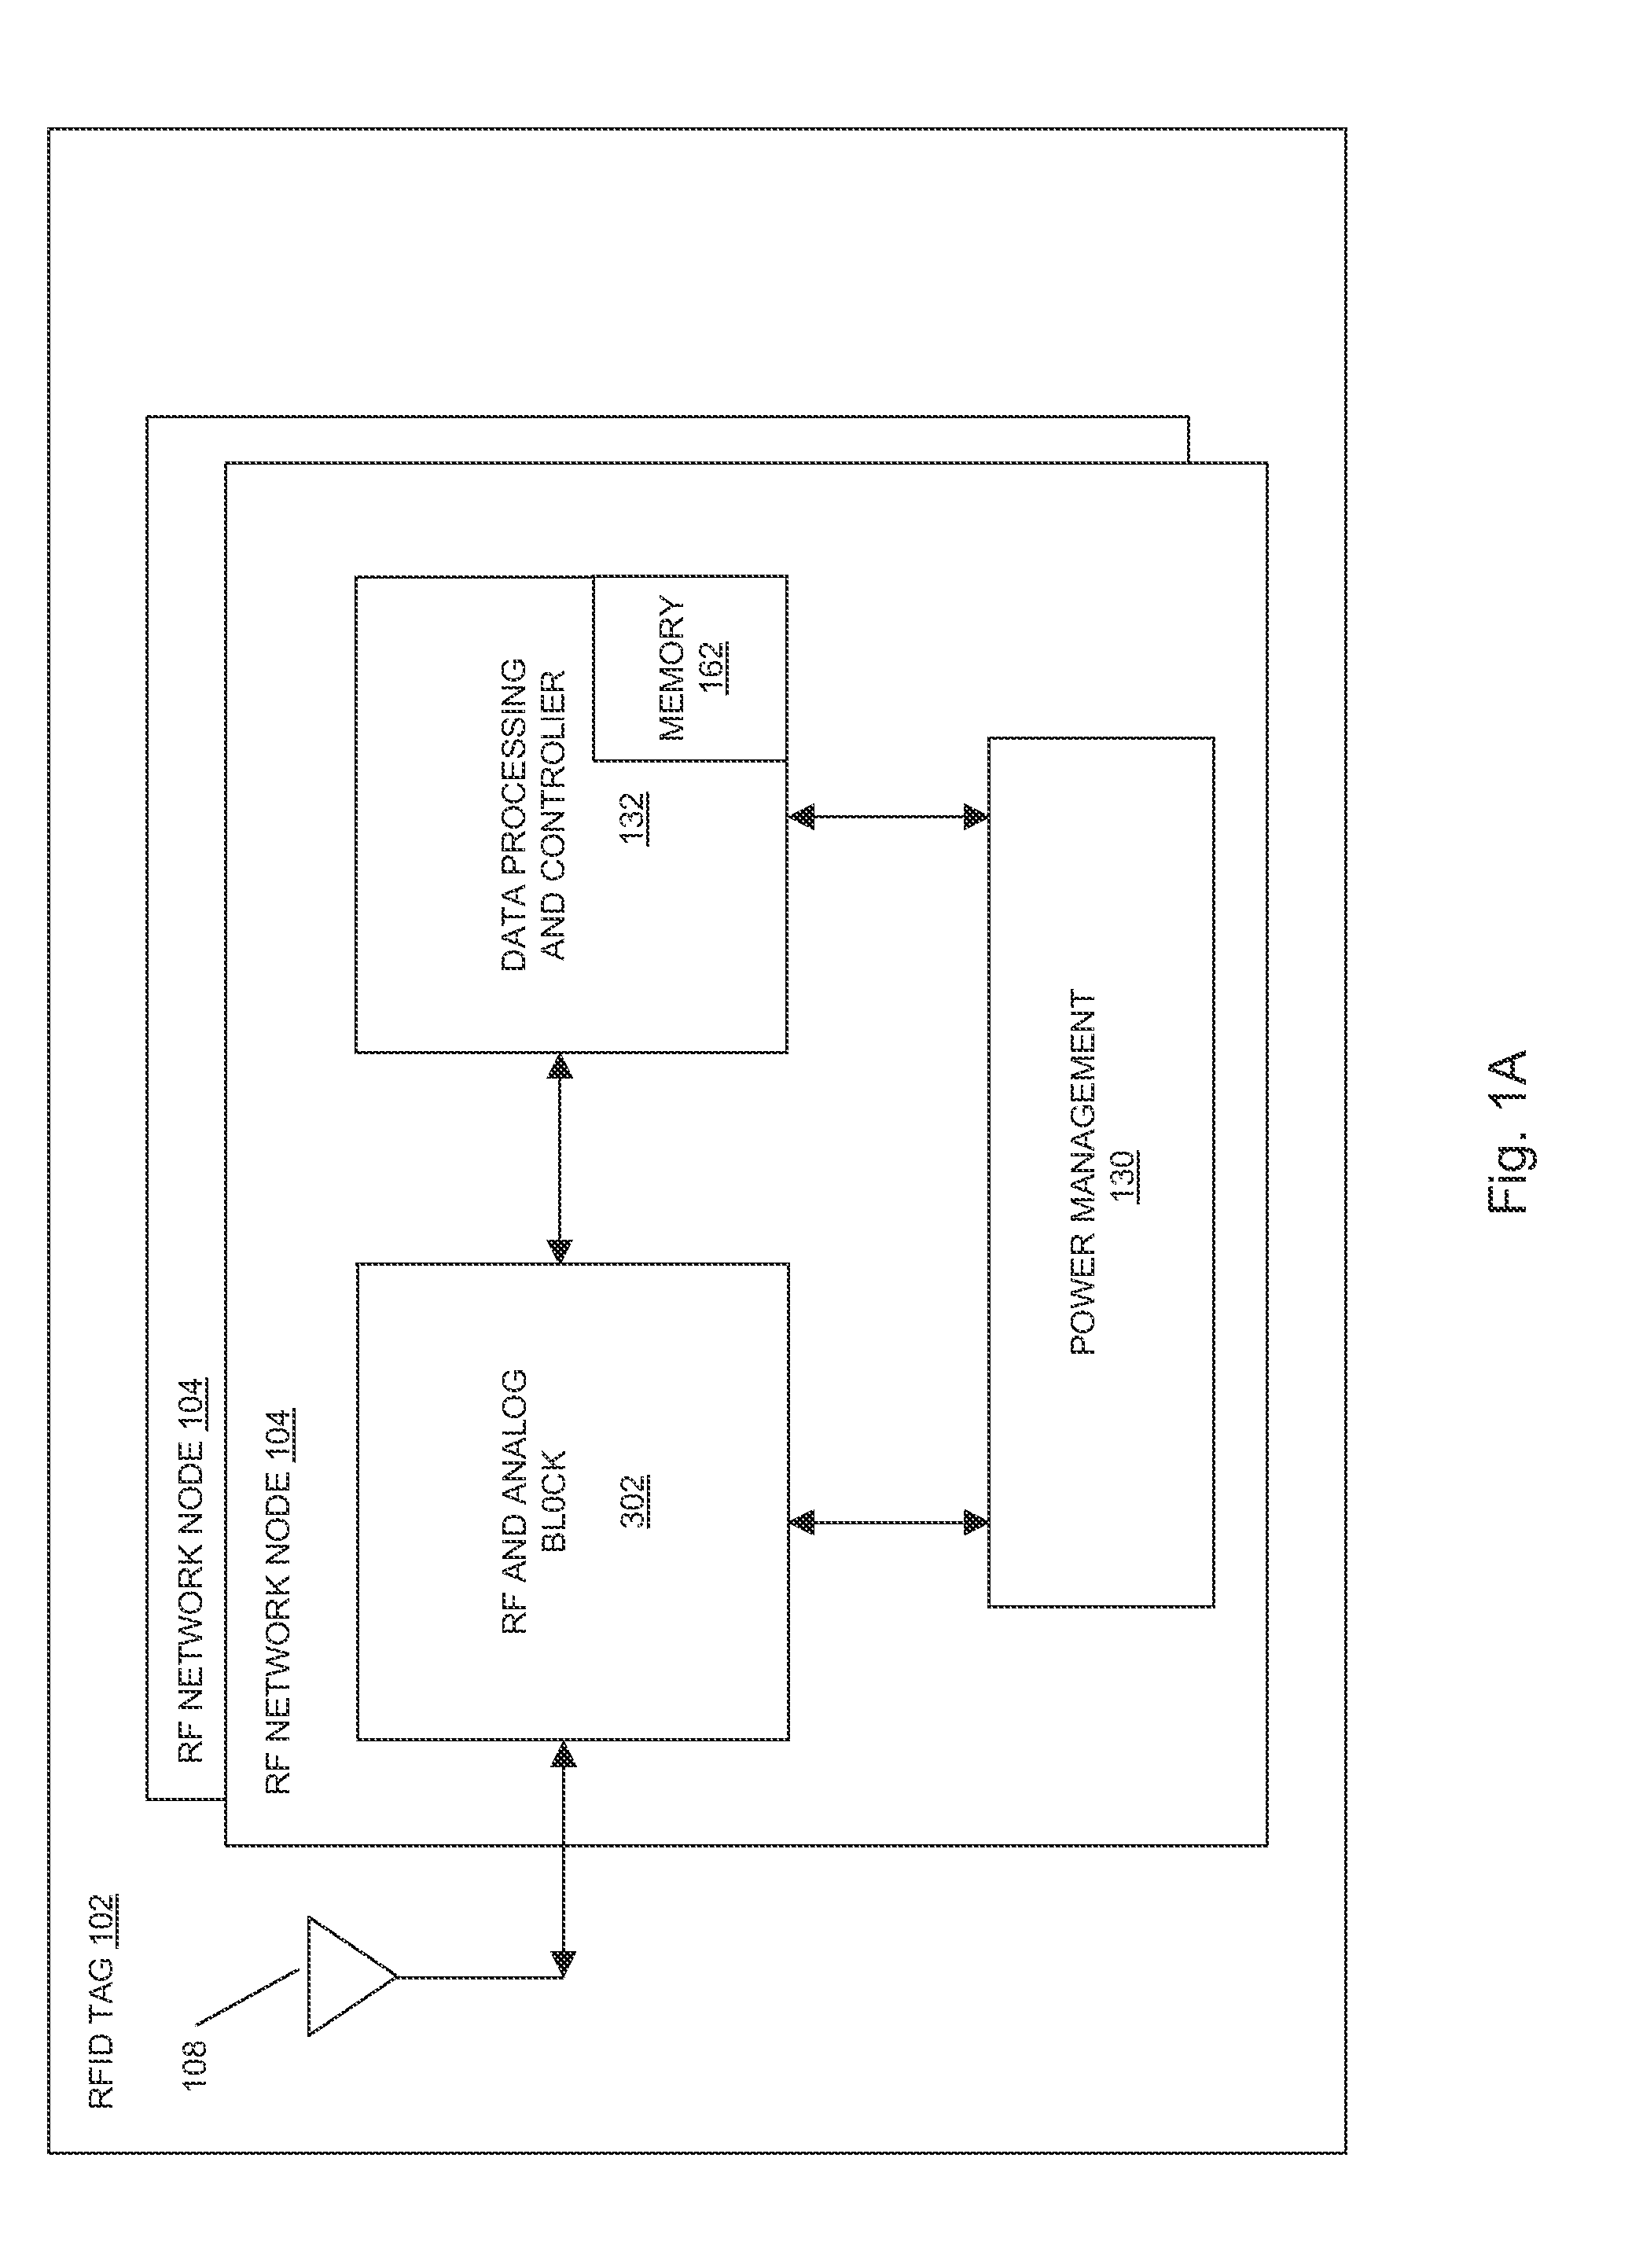 Method for memory mapping in a composite RFID tag facility